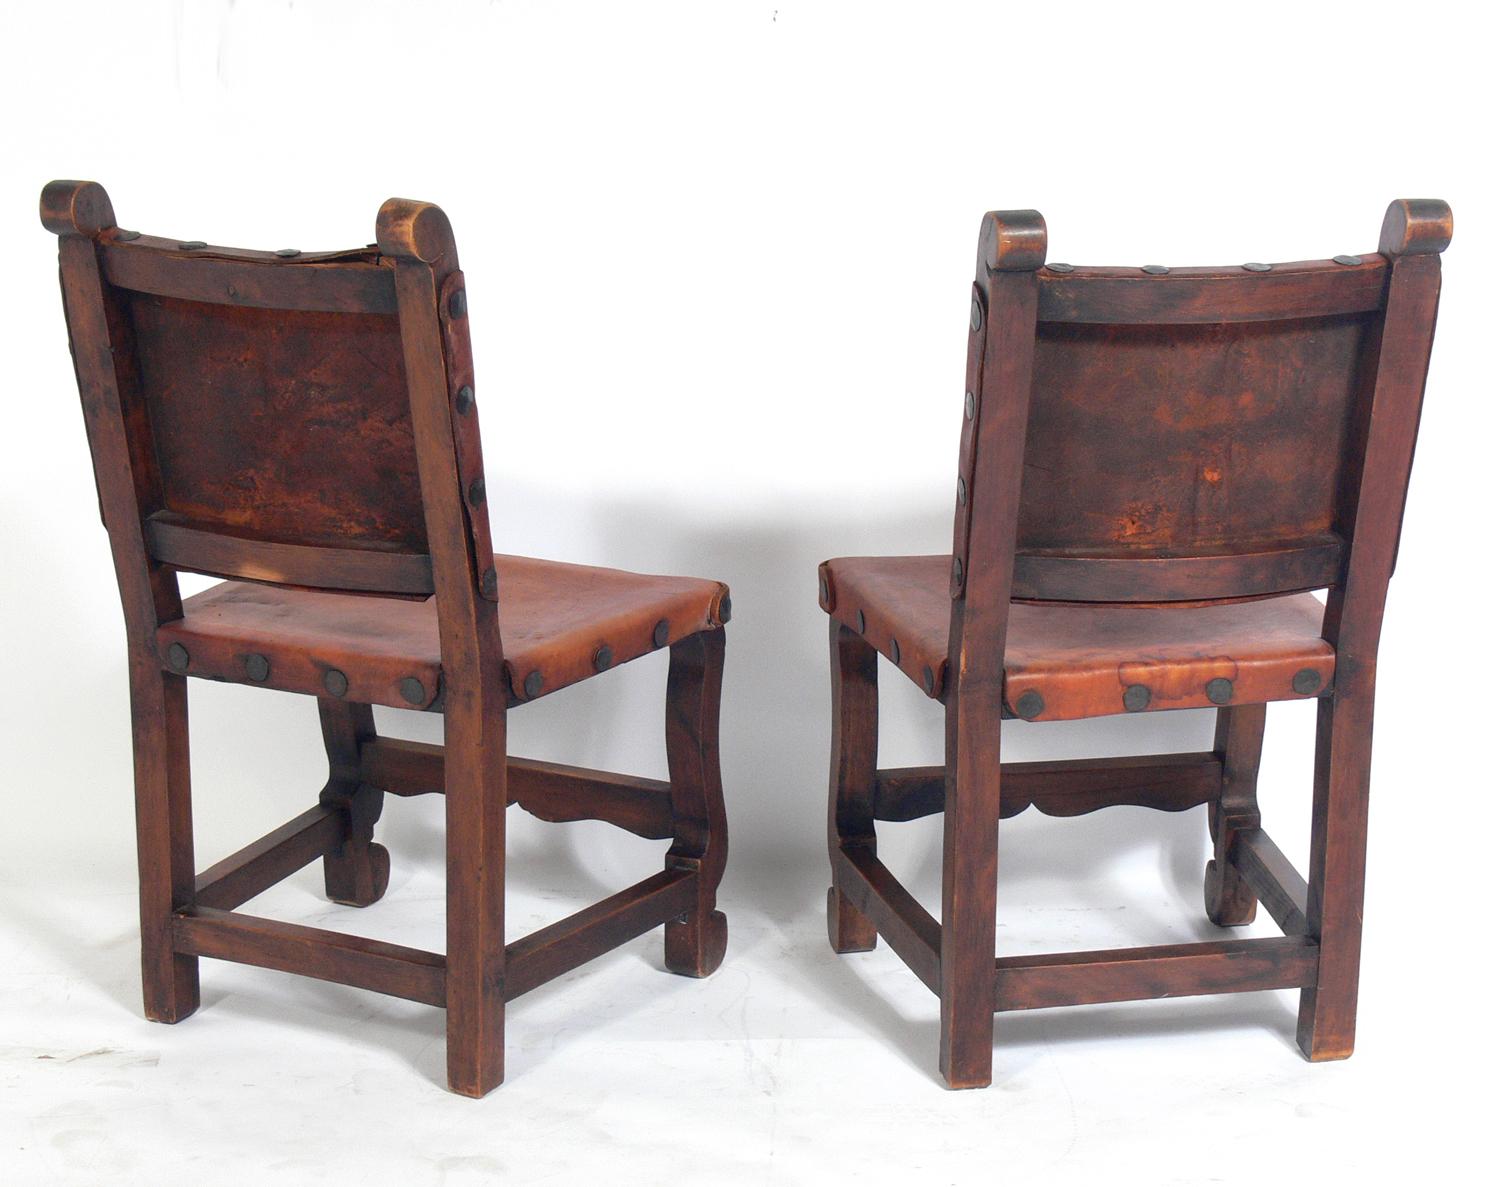 Bohemian Set of Four Mexican Leather Dining Chairs